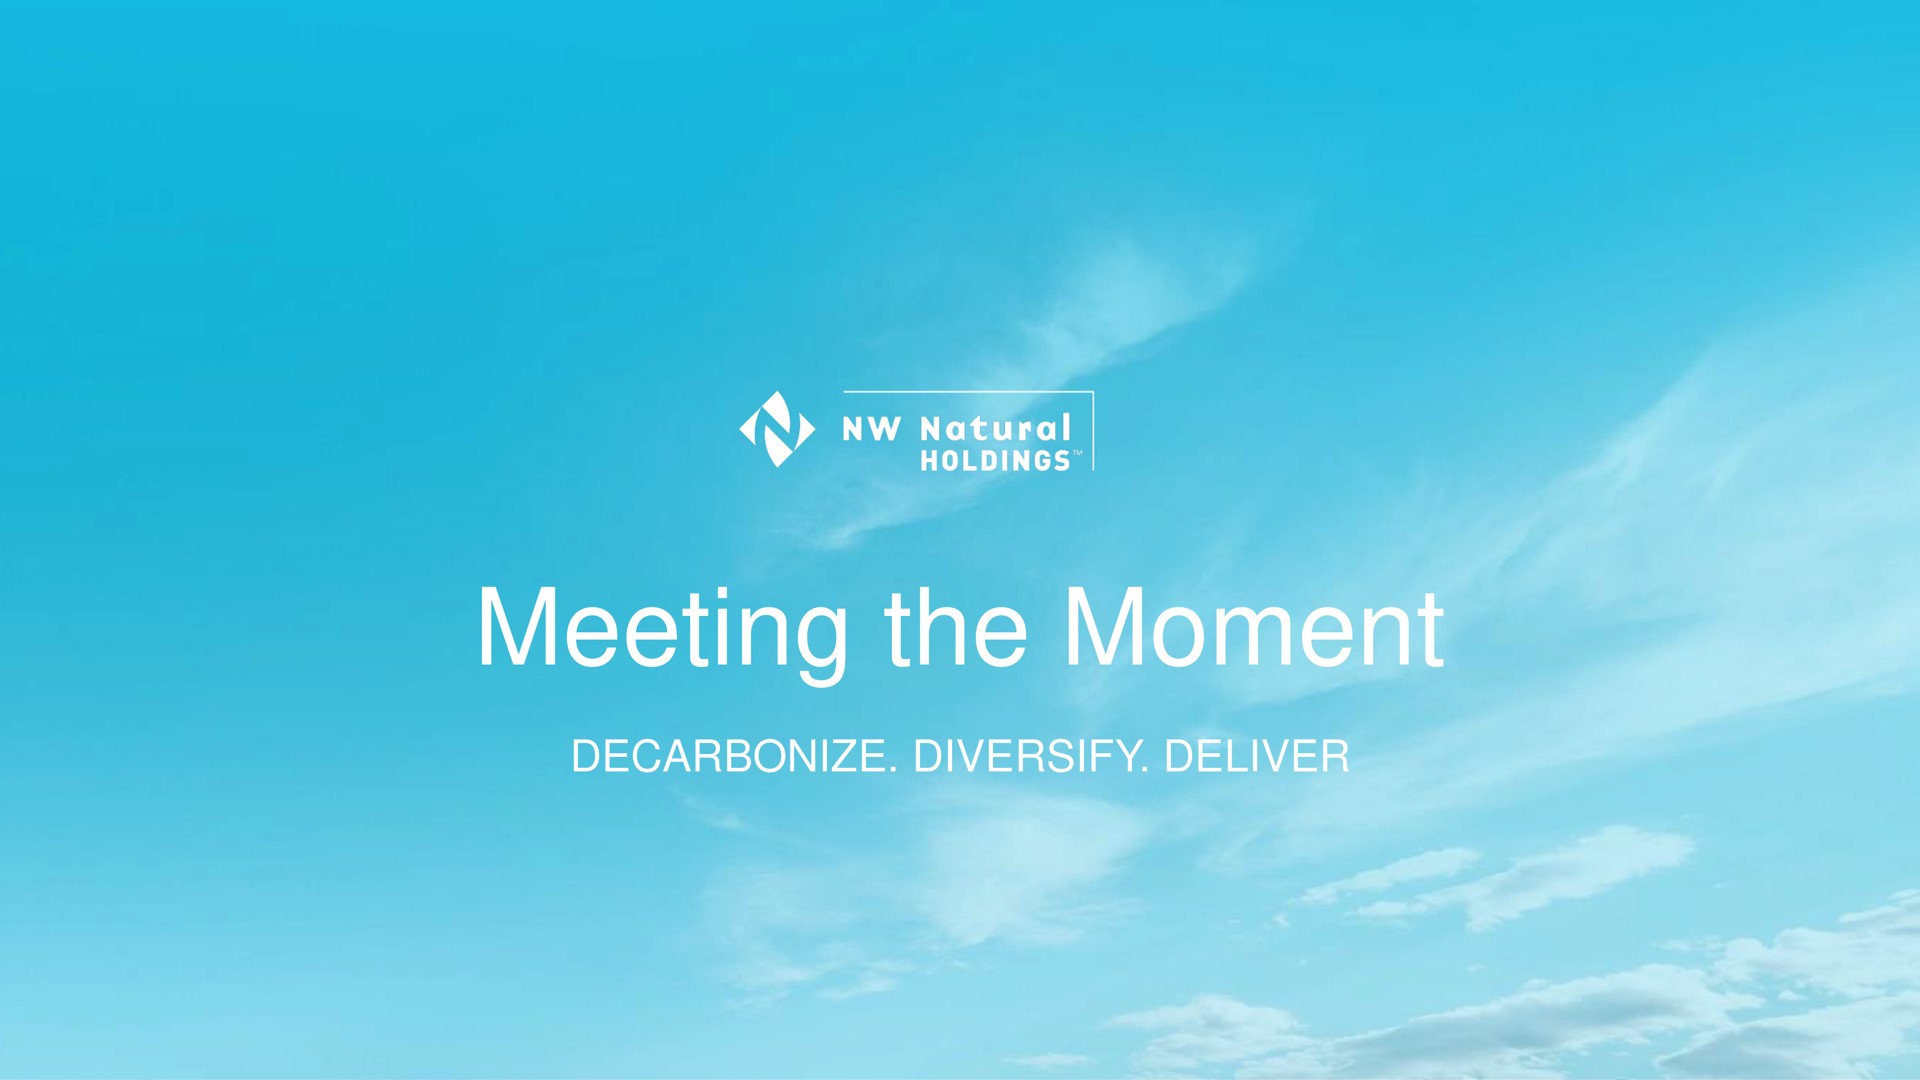 meeting the moment | NW Natural Holdings